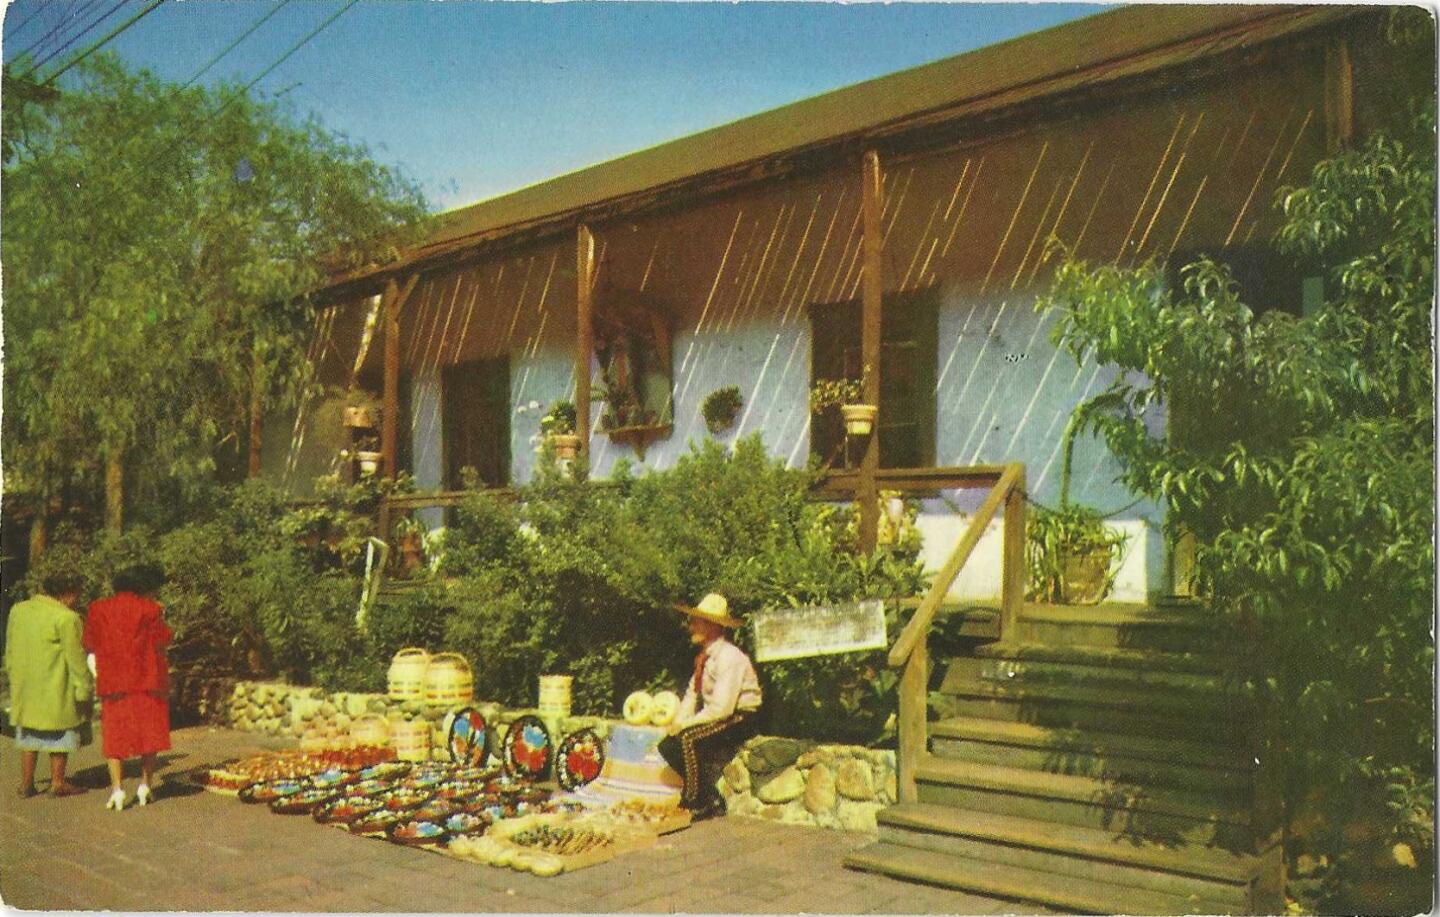 The front of a postcard depicting the Avila Adobe